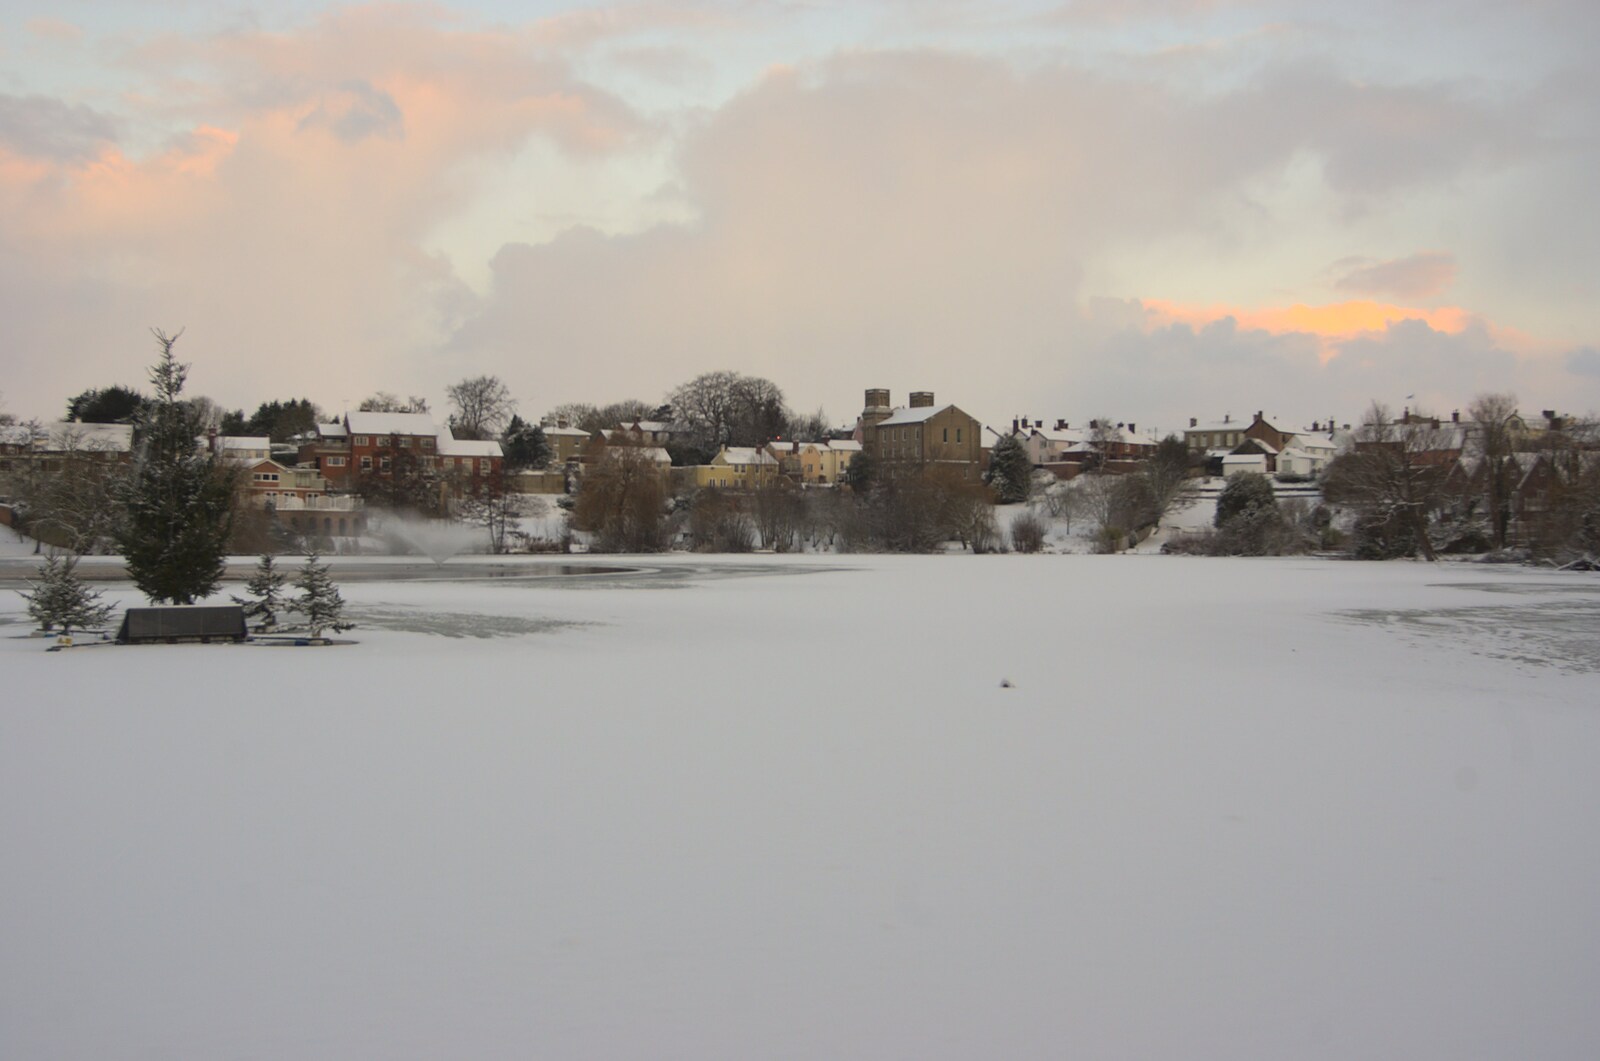 A Snowy Miscellany, Diss, Norfolk - 9th January 2010: The sun rises over Diss